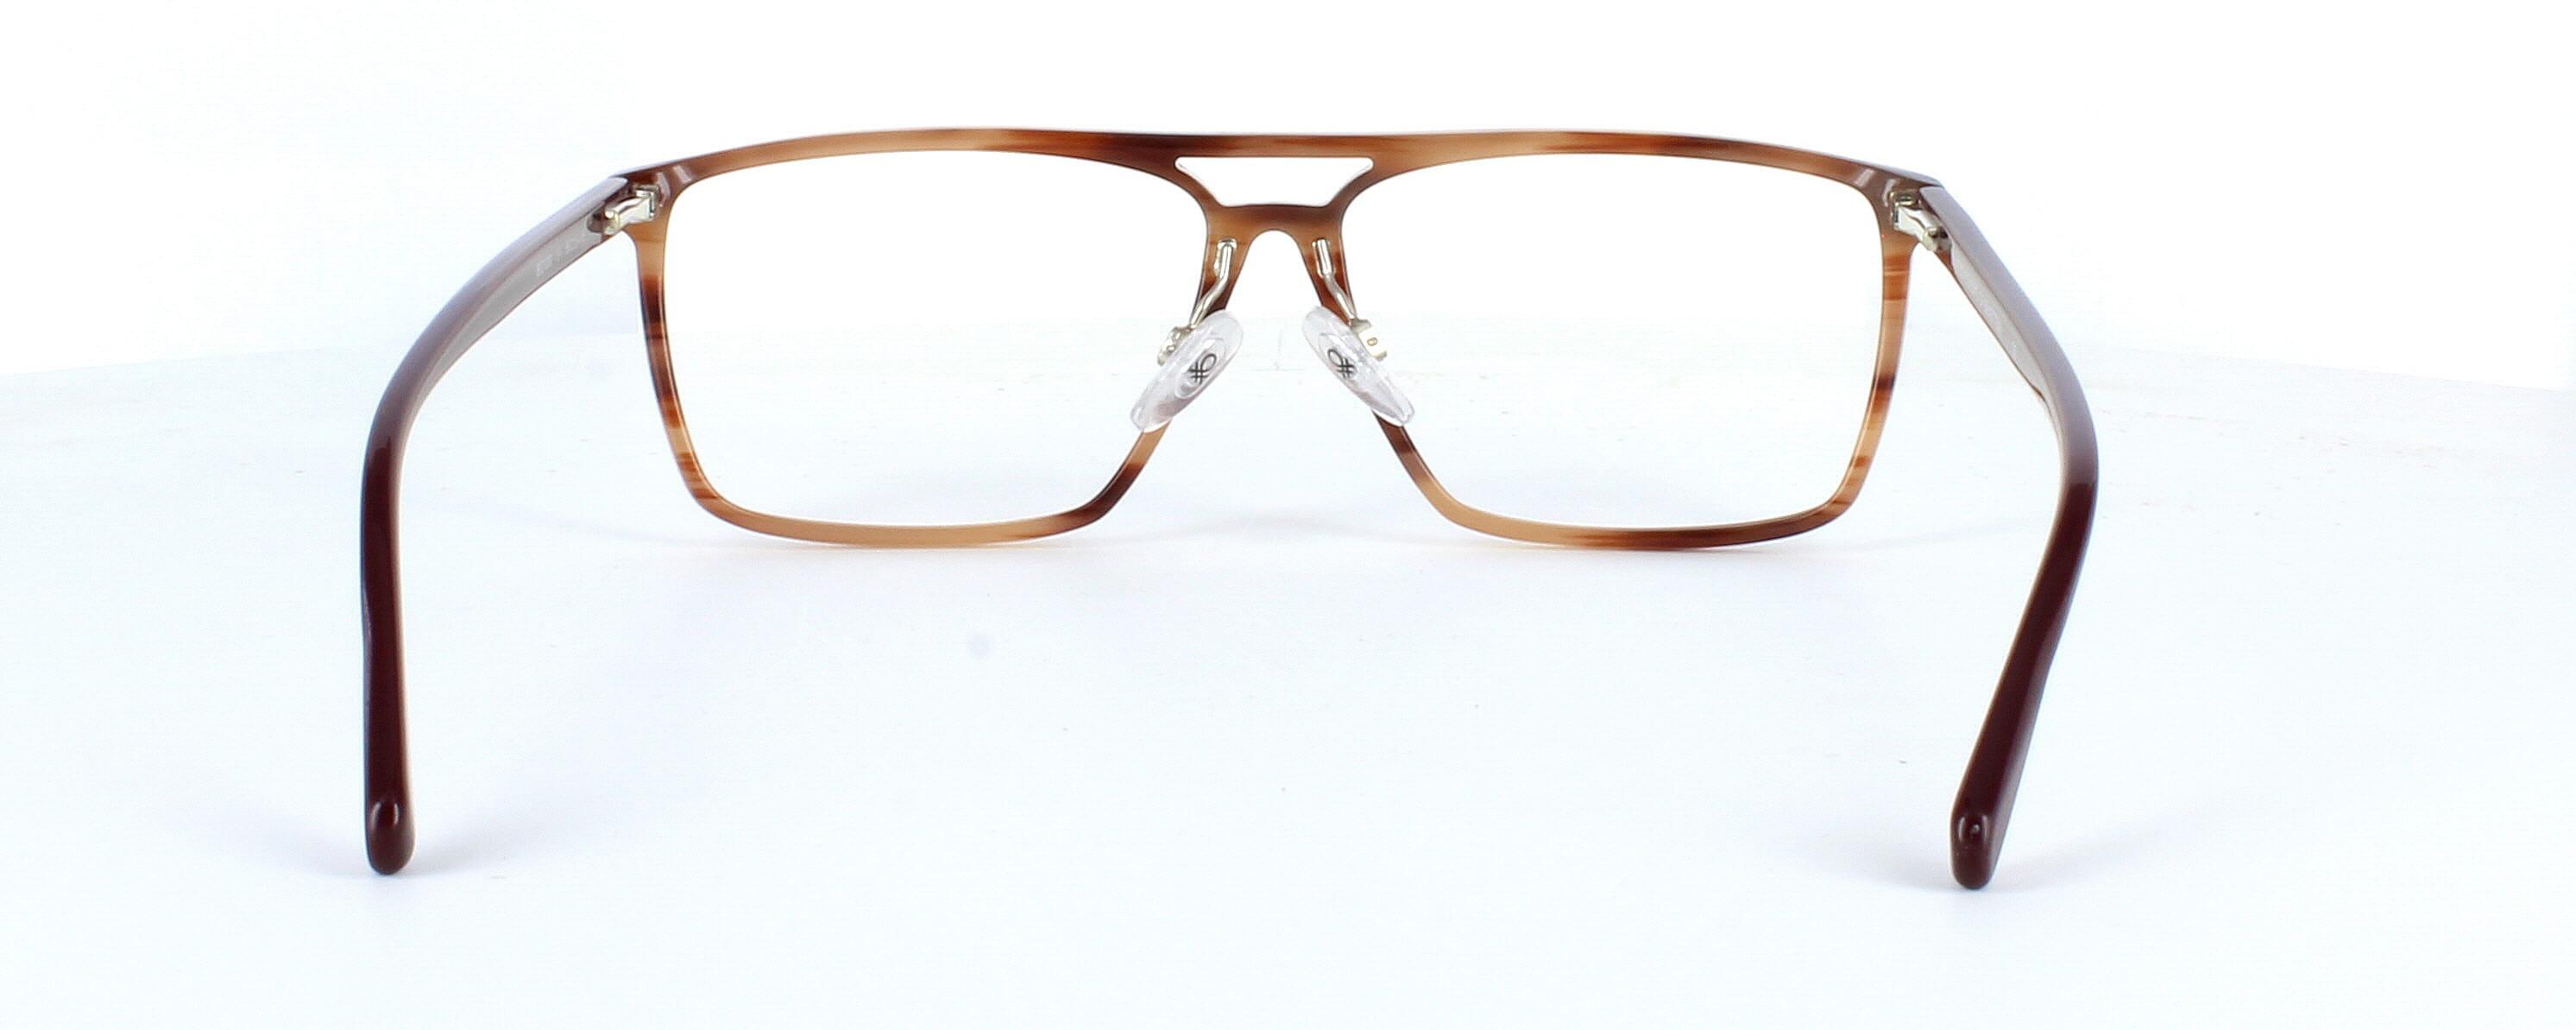 Benetton BE1O000 151 - Gents designer hand made acetate frame with tortoise face and brown arms - image view 3